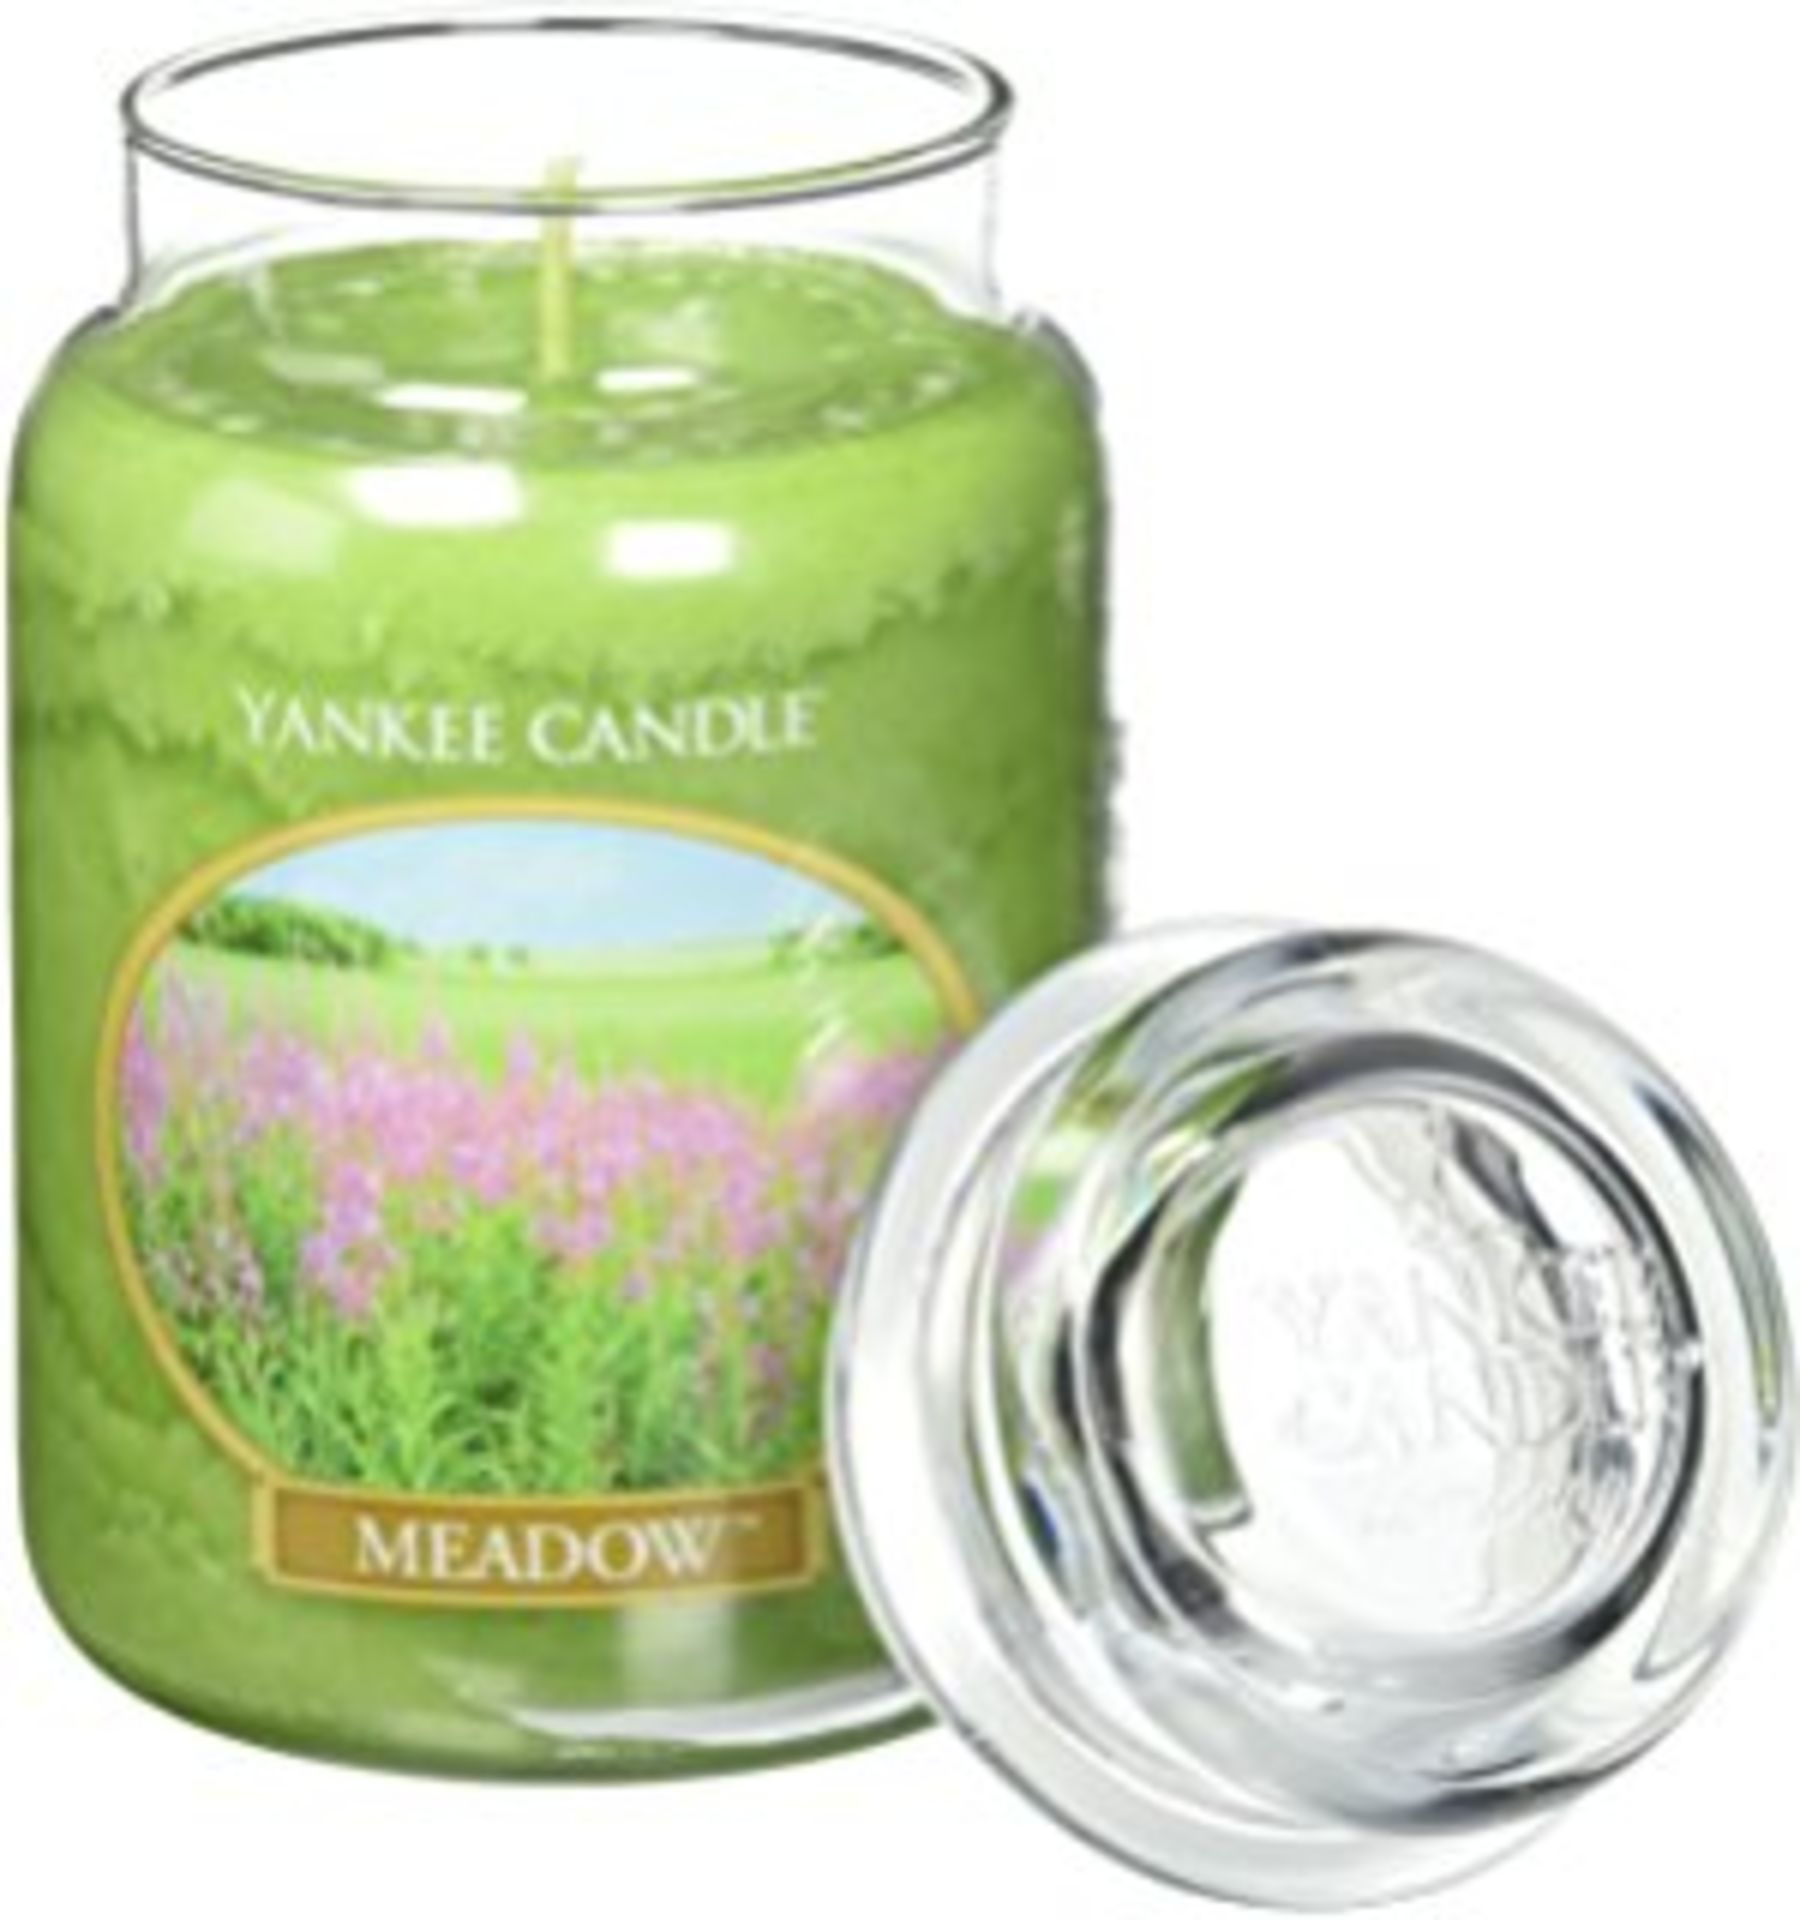 V Brand New Large 623g Yankee Candle Jar Meadow ISP £29.95 (Ebay)